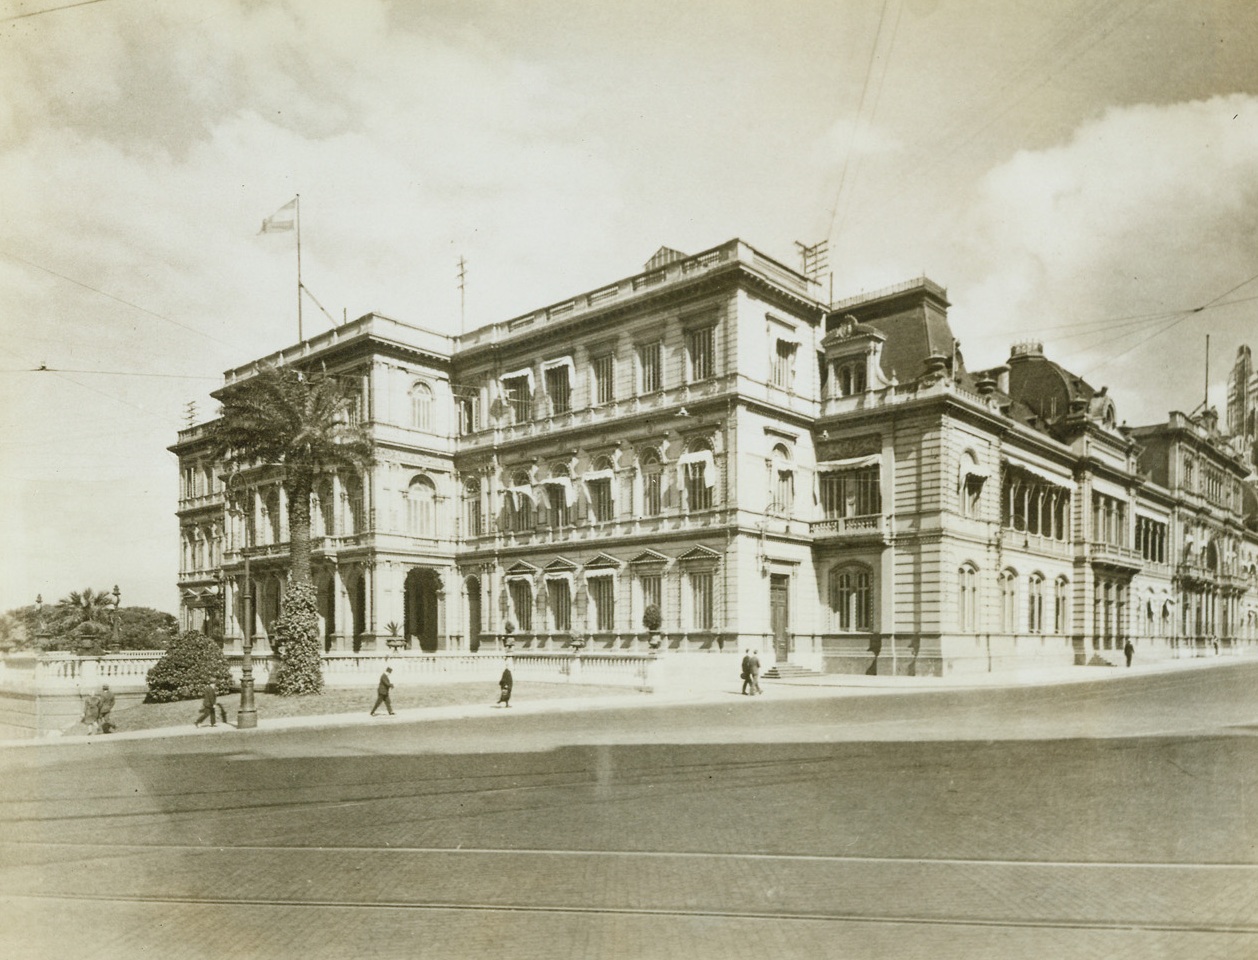 Barred to Castillo, 6/4/1943. Buenos Aires – The Casa Rosado, government house in Buenos Aires, now houses Gen. Antonio Rawson, partners with Gen. Pedro Ramirez in Argentina’s revolt against Castillo, Argentine president who has fled the headquarters. With his plea for assistance from his first field artillery turned down, President Castillo left the Casa Rosado. He returned to be handed an ultimatum demanding his resignation. Although the Chief of Police was ordered to defend the Government House against anti-Castillo demonstrators. Resistance was weak and the leaders of the pro-Allied movement moved in. Credit: ACME;